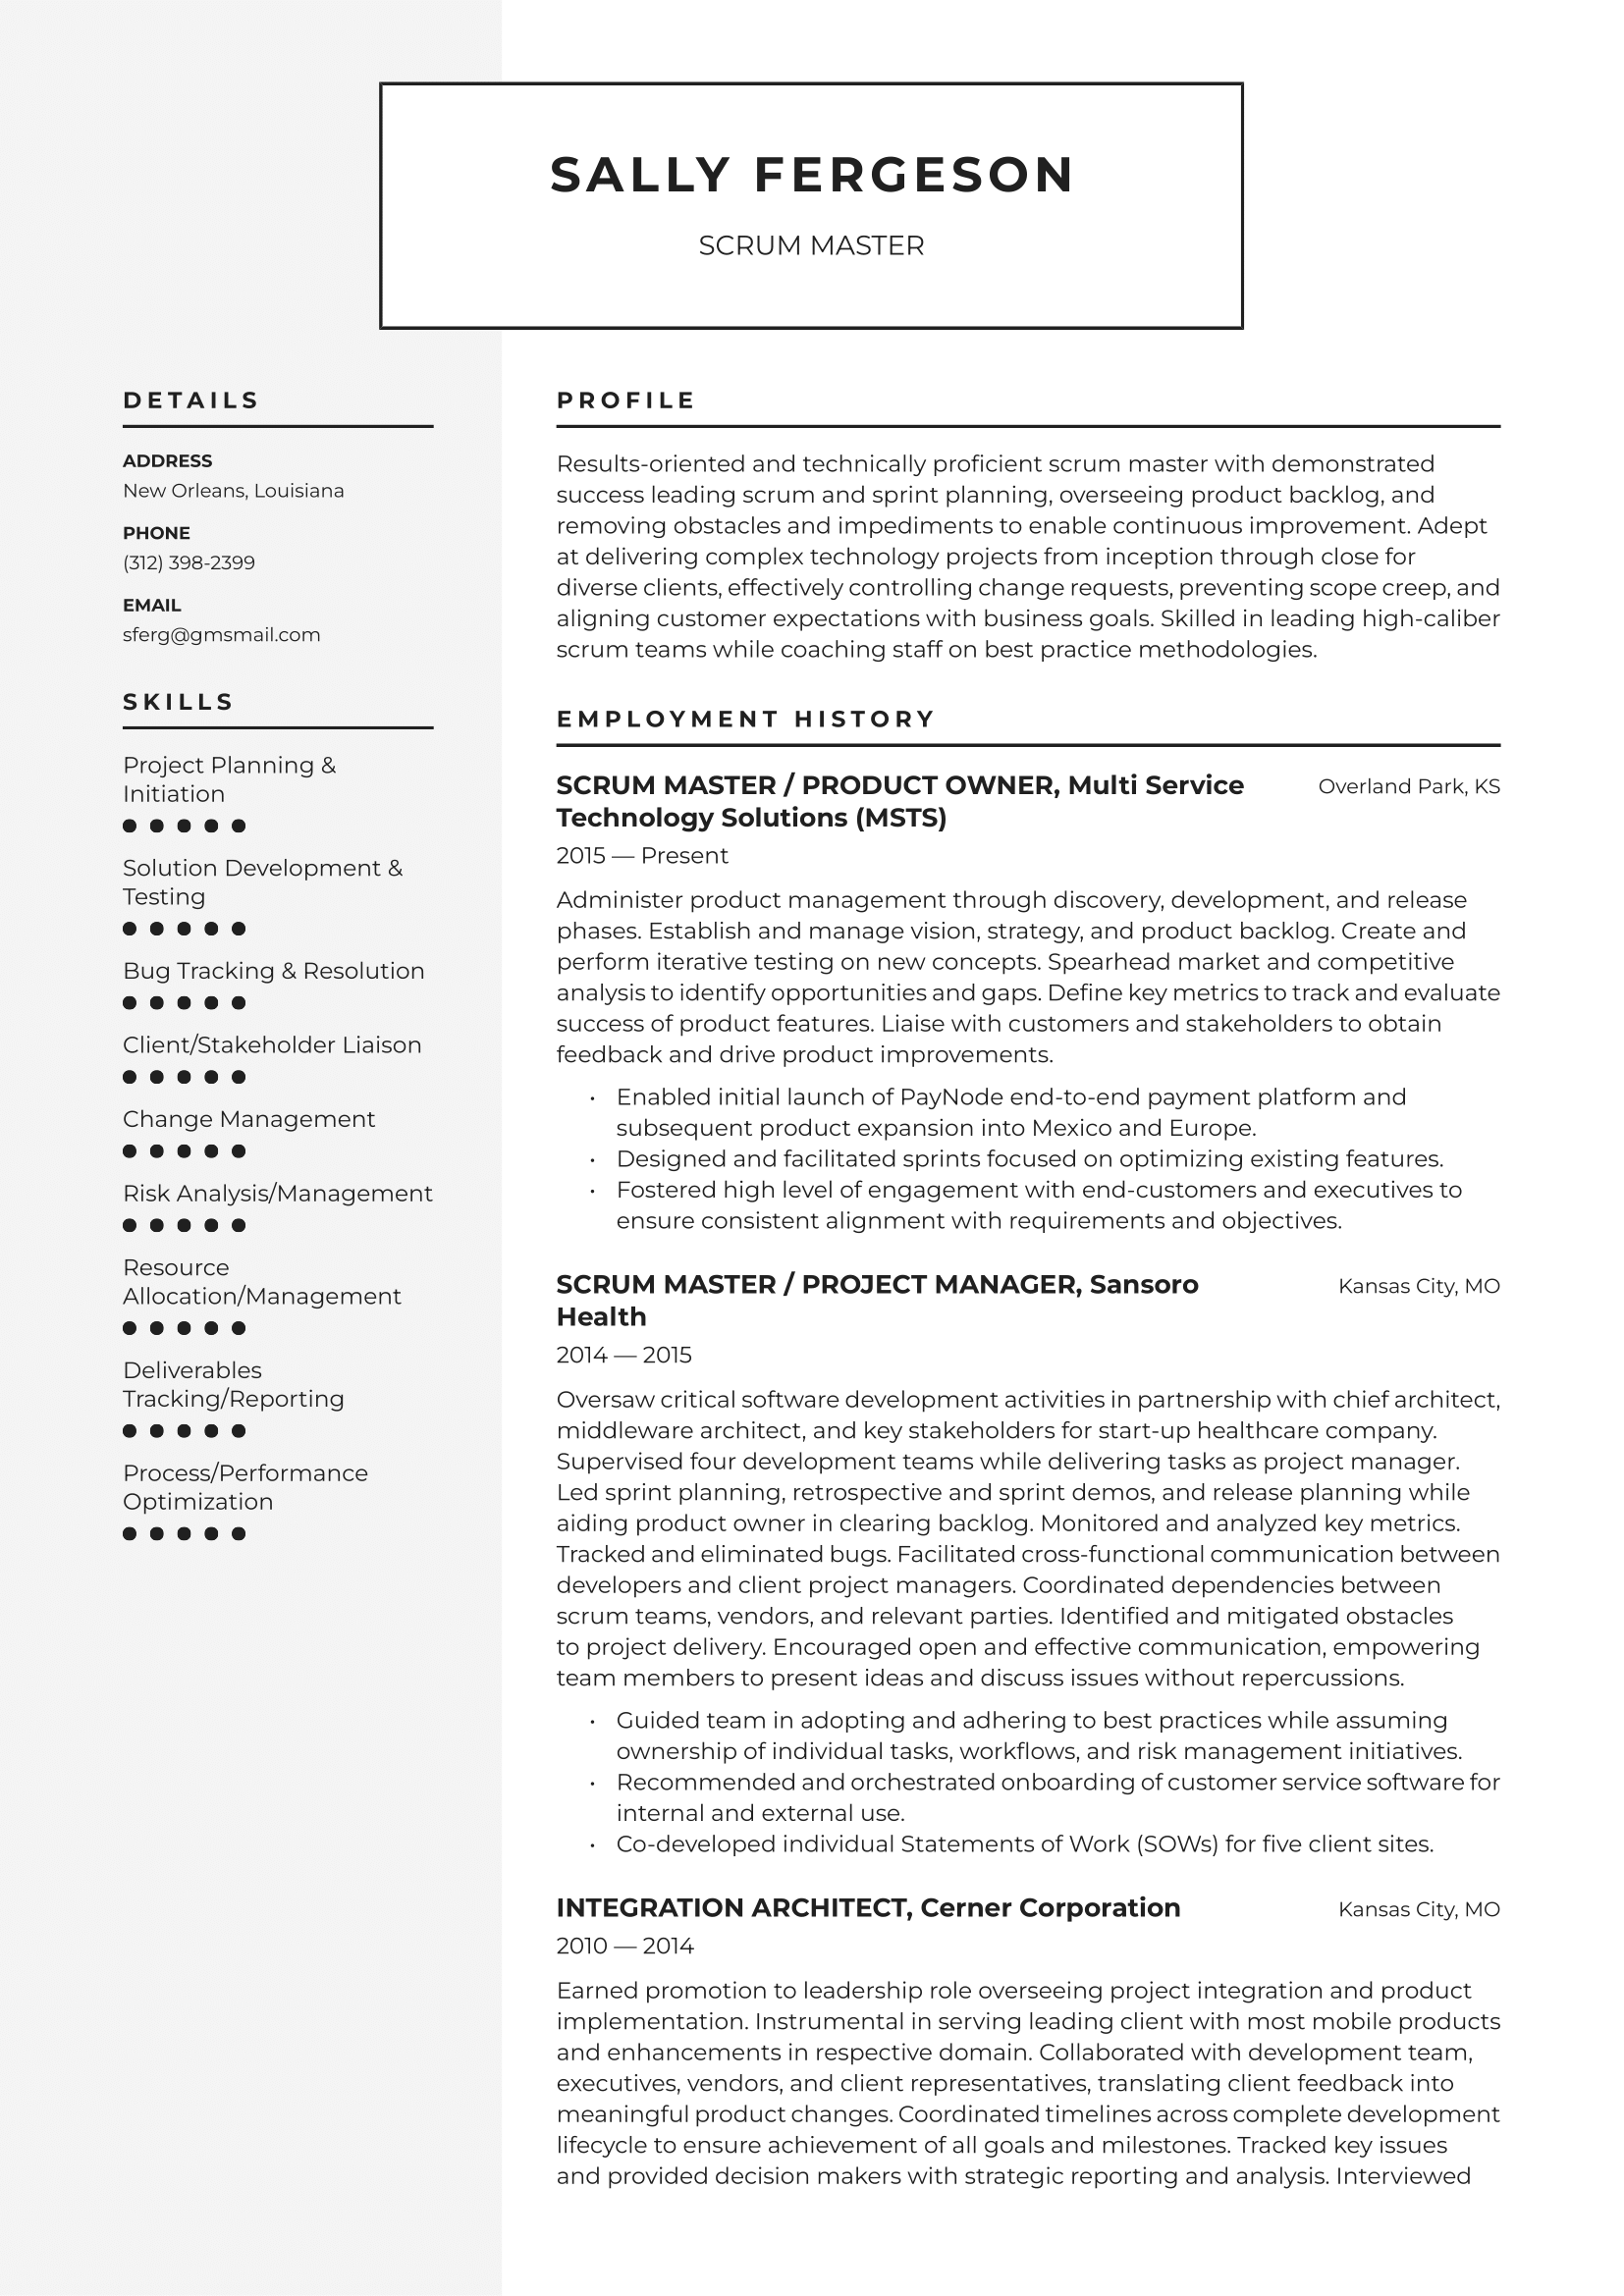 Scrum_Master-Resume-Example.png